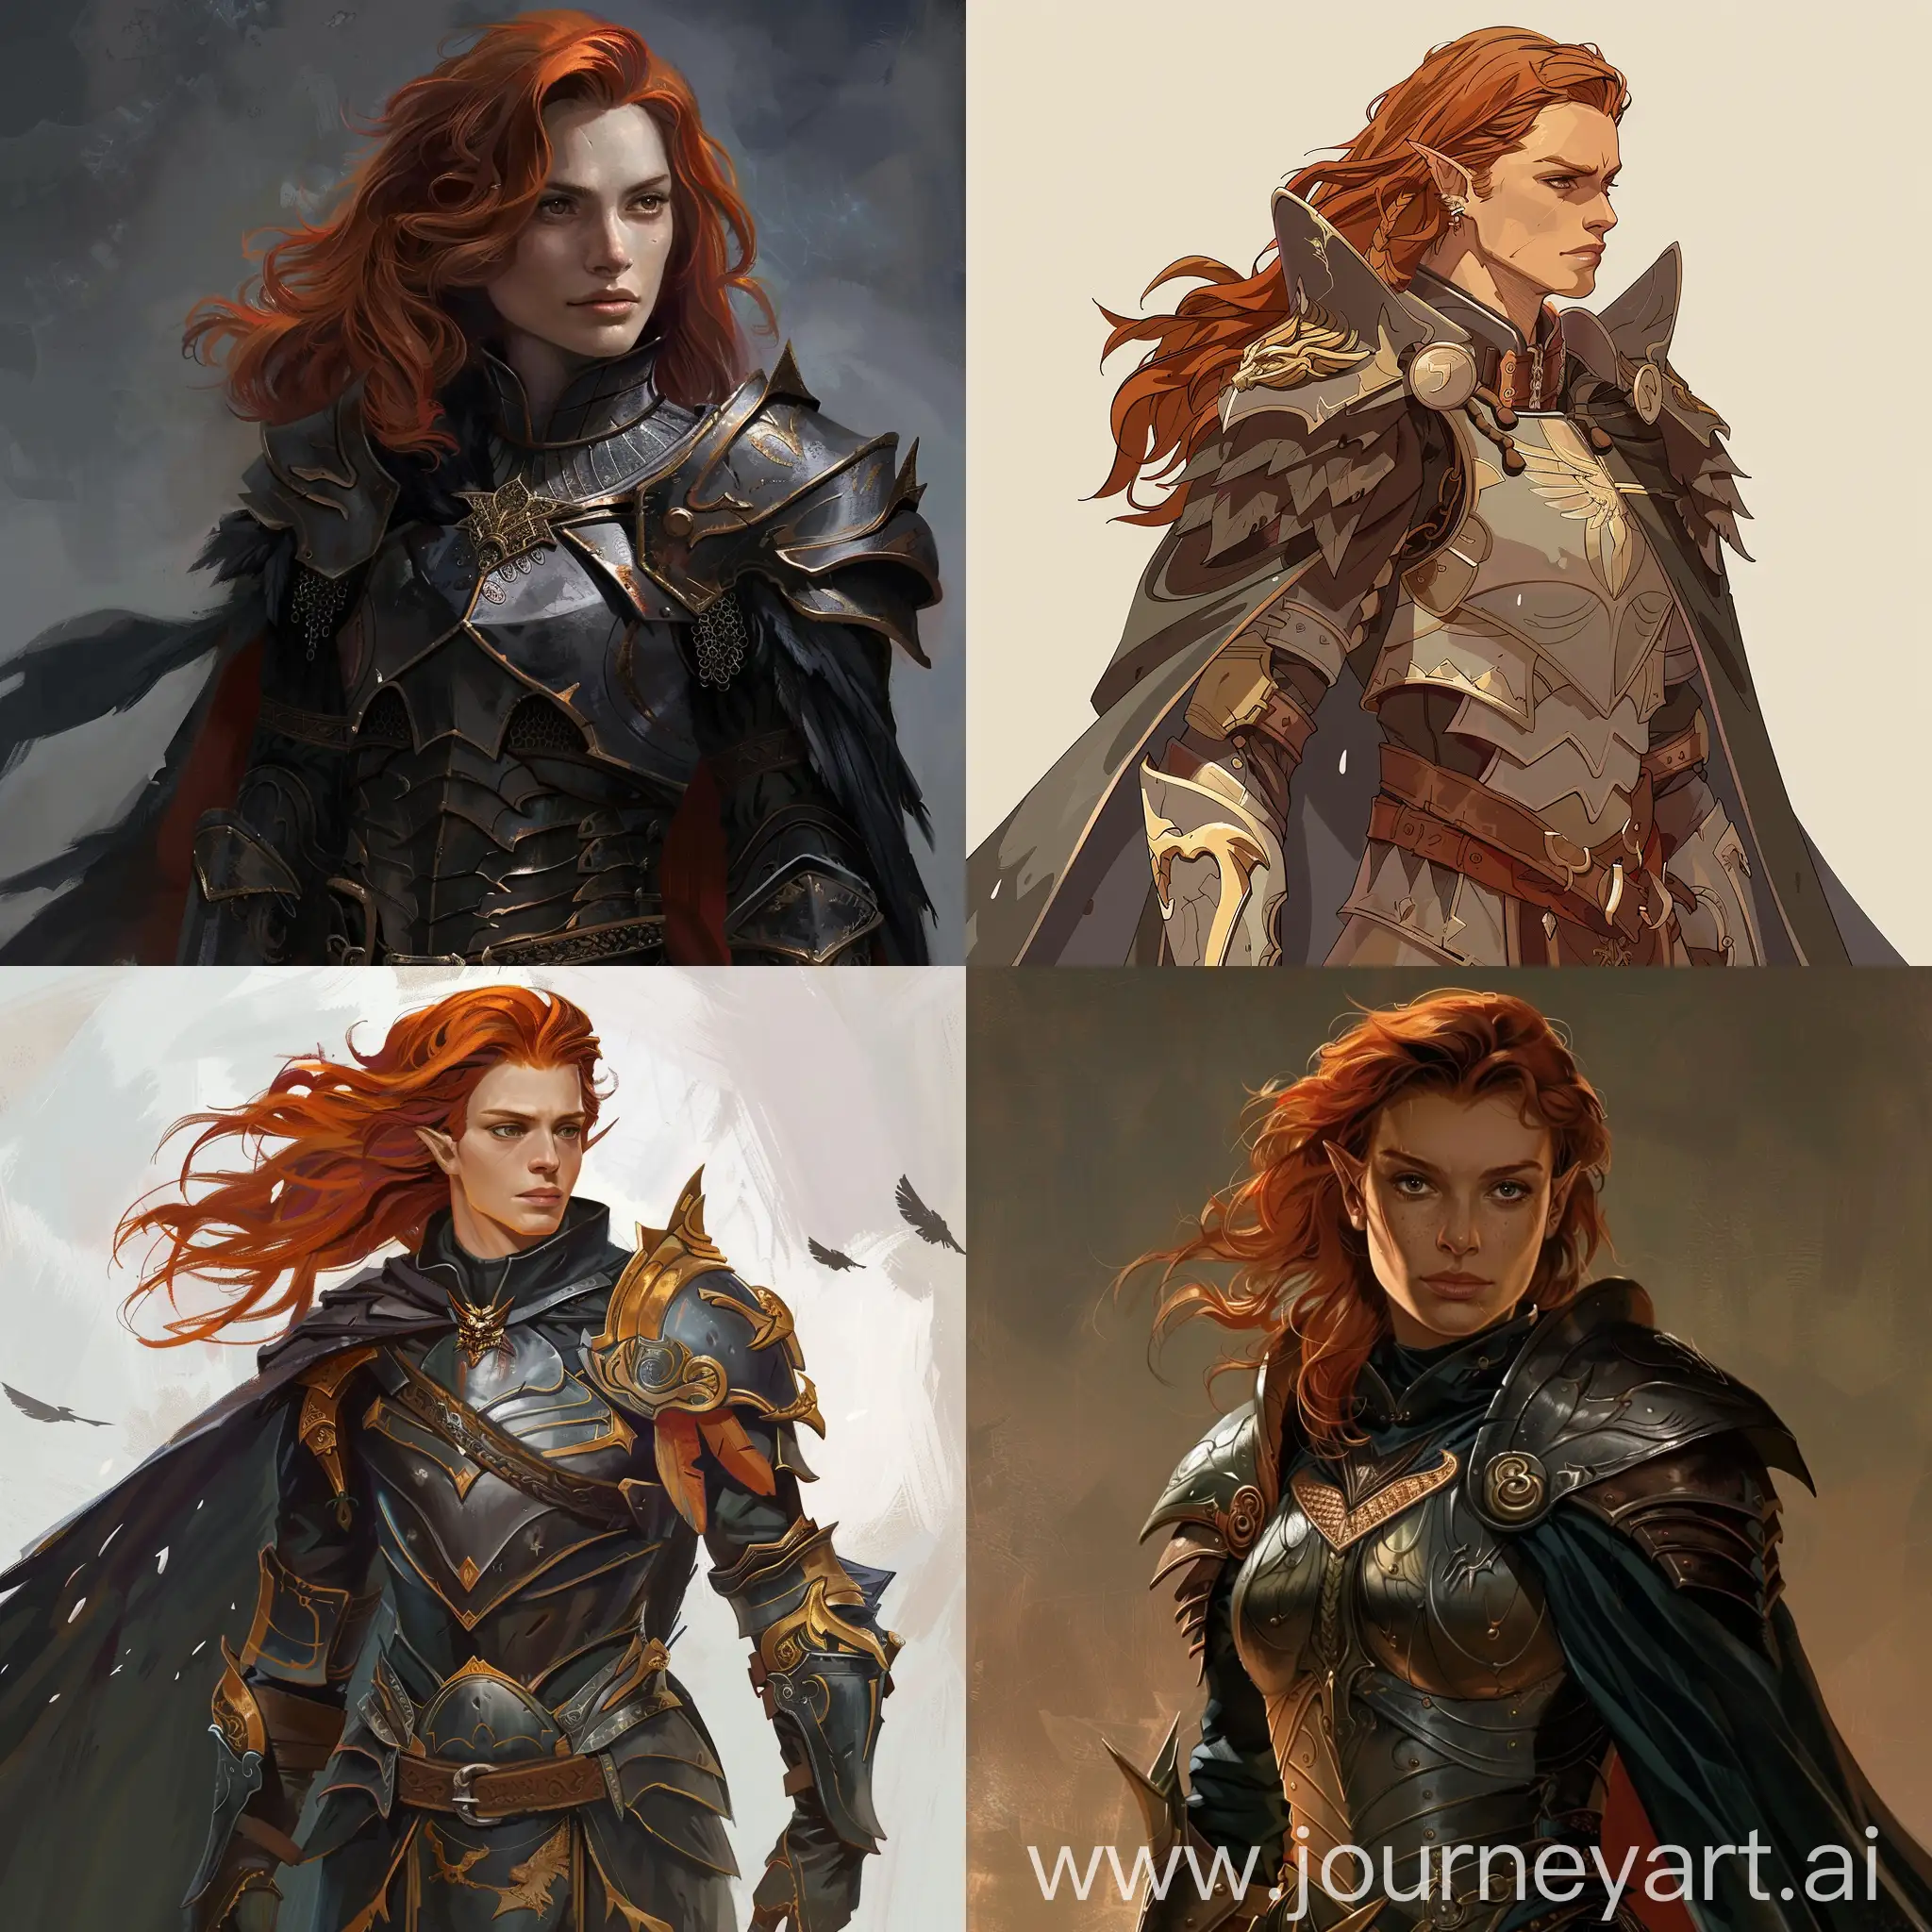 leader of the raven guild dnd,warrior with auburn hair,has a armor and a cape.